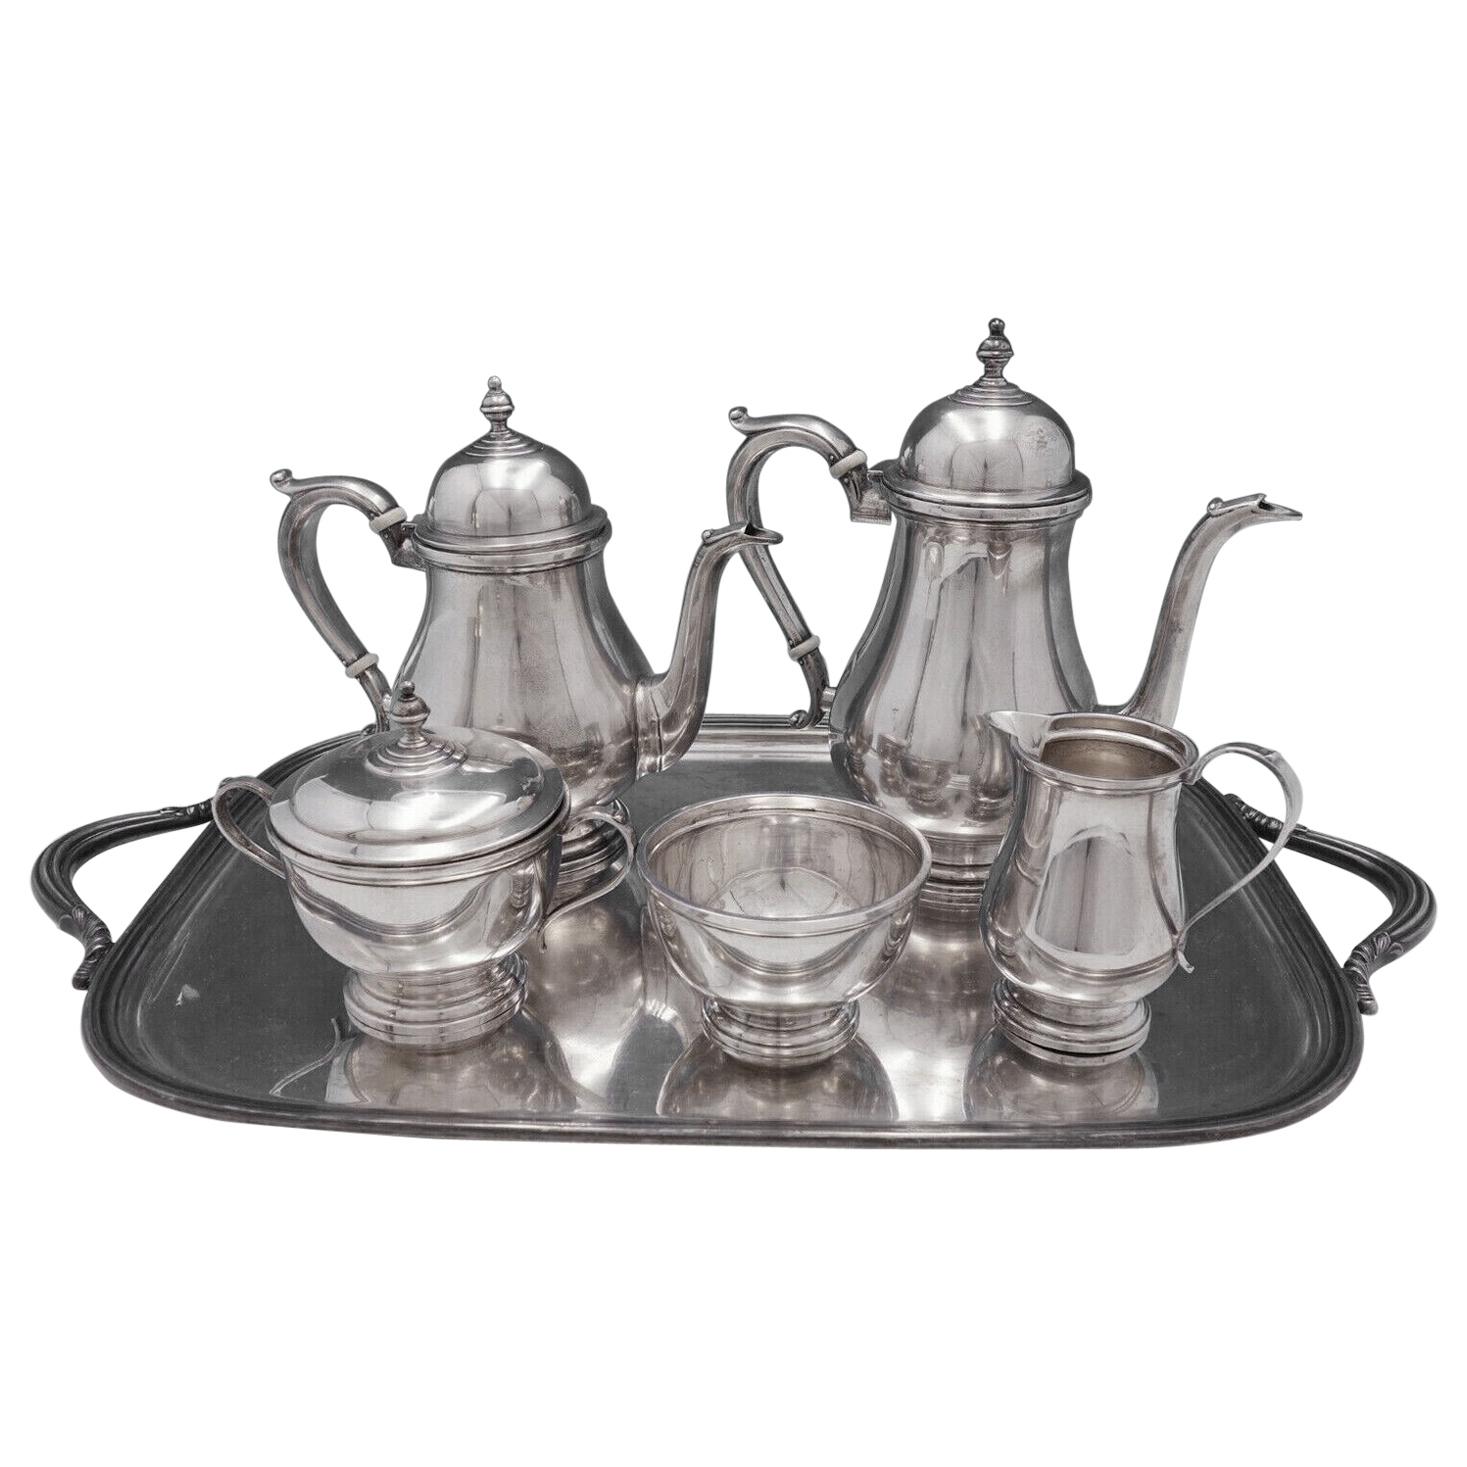 Exemplar by Watson Sterling Silver Tea Set 5-Piece with SP Tray, circa 1714-1727